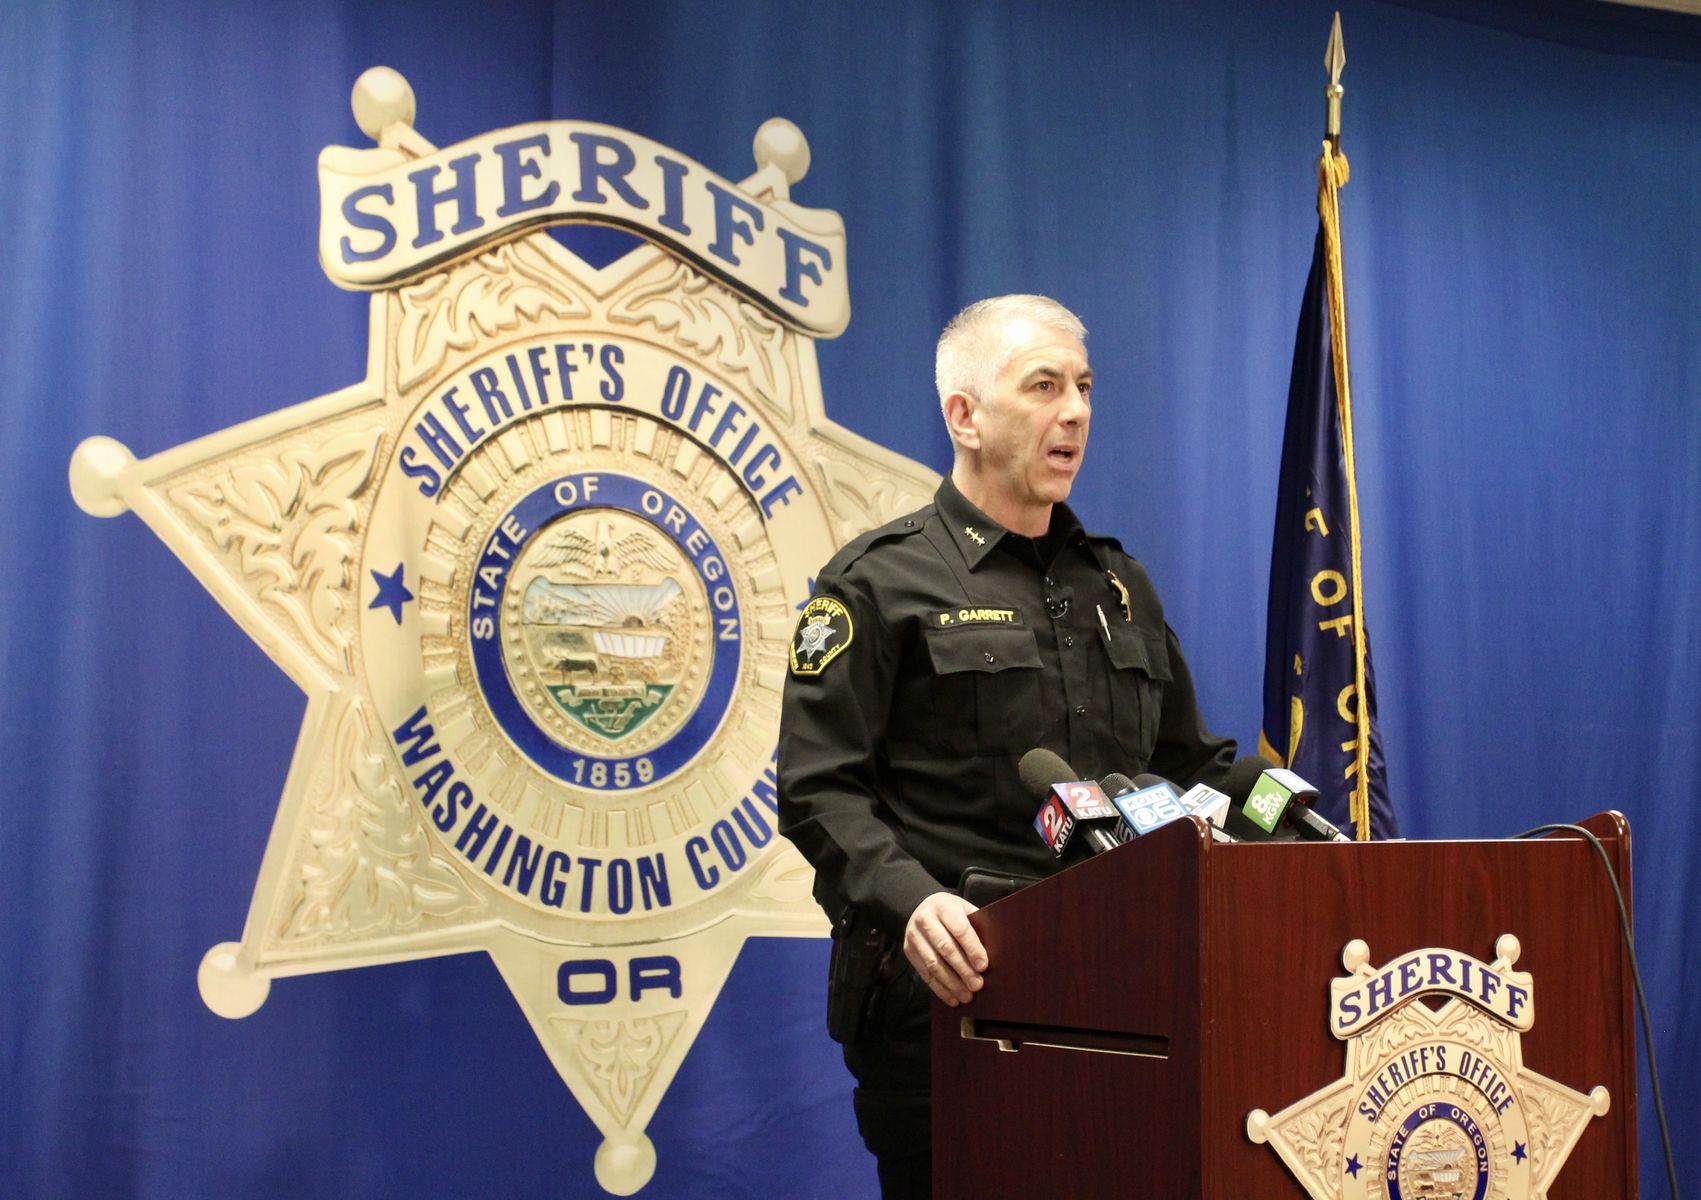 Washington County Sheriff Pat Garrett called for a moment of silence during a press conference on Wednesday, April 27, 2022.